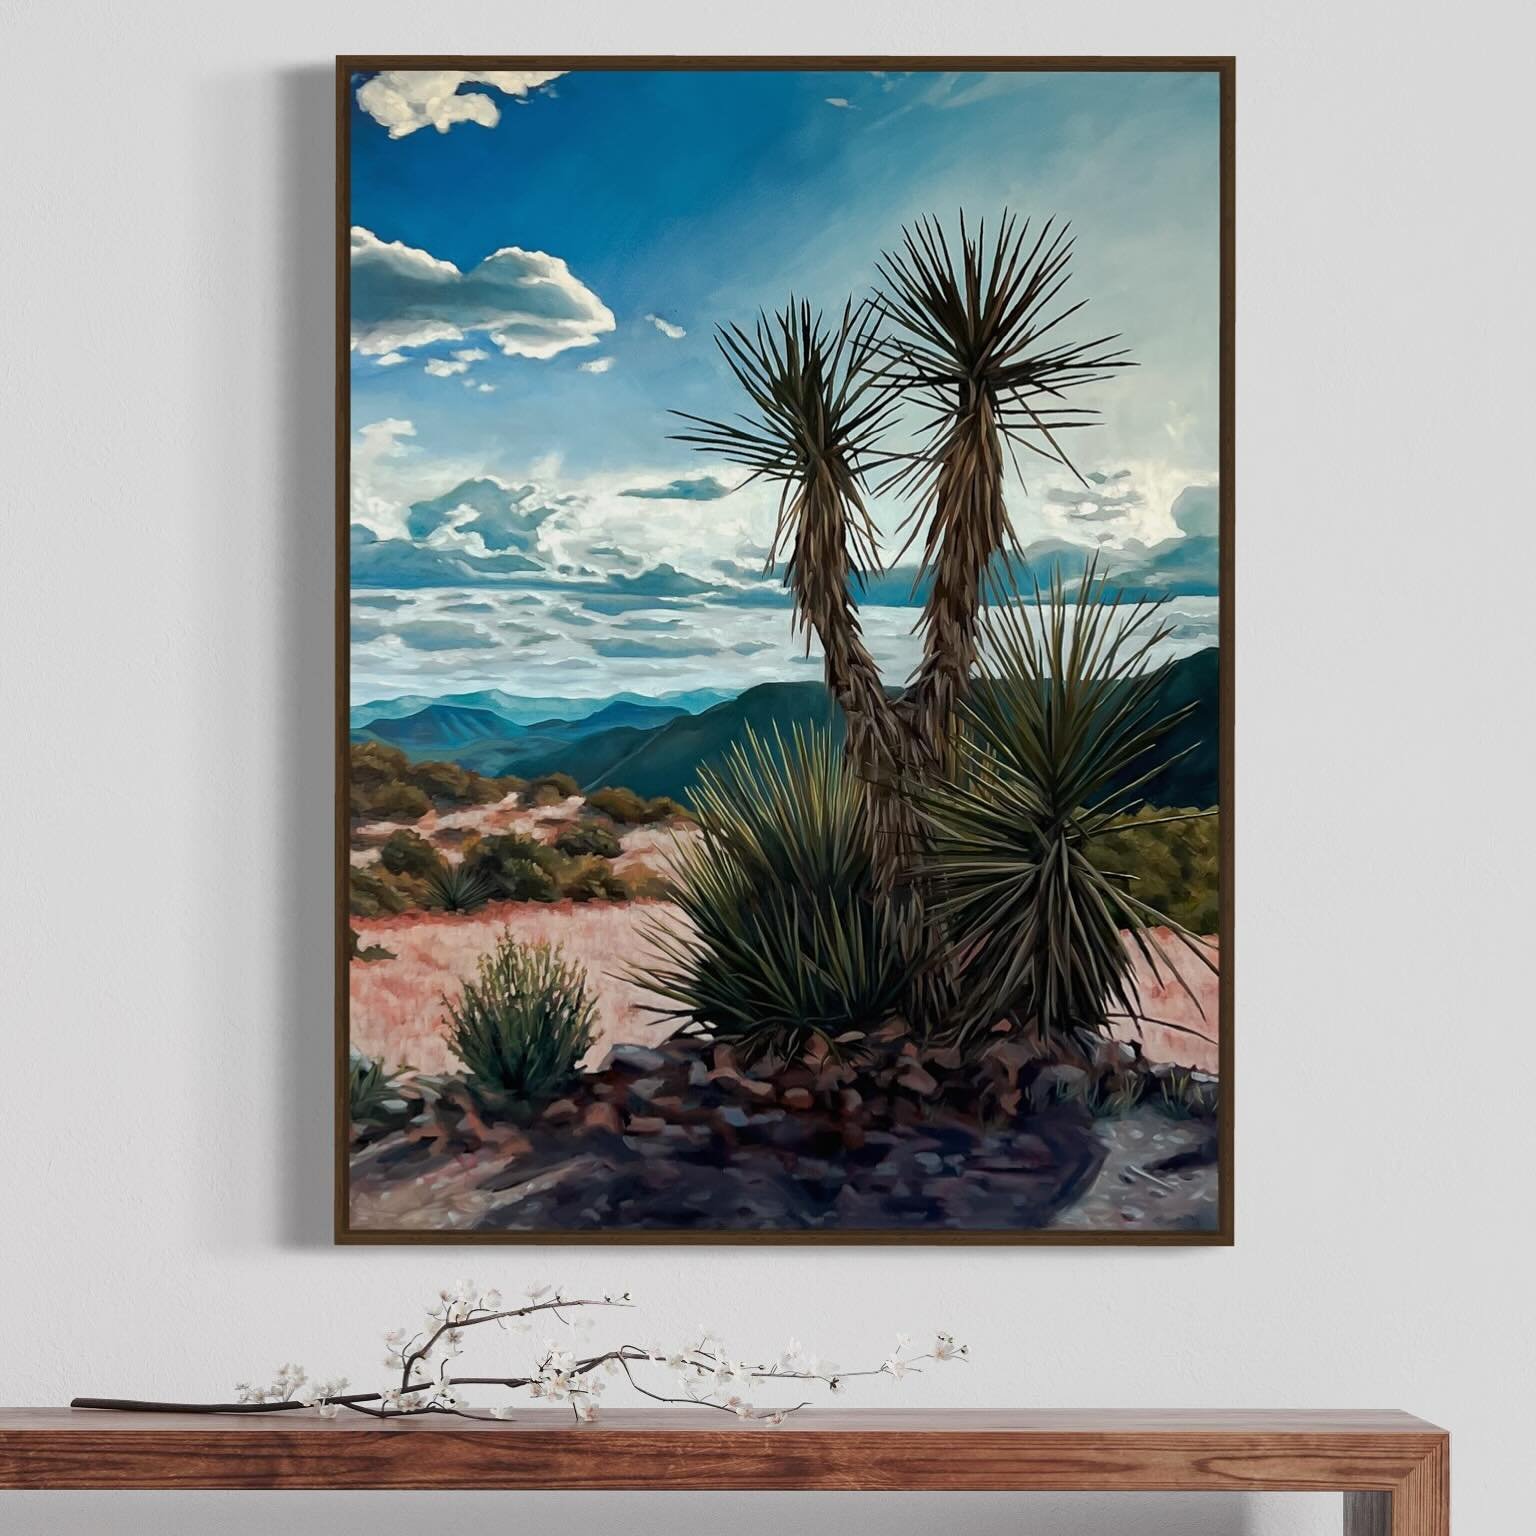 It&rsquo;s time for another trip to West Texas to soak up tranquil views like this. Who&rsquo;s with me? 

You can see this oil painting, one of my favorite pieces in my recent collection, at @commercegallery as part of their April group show. 

#pie